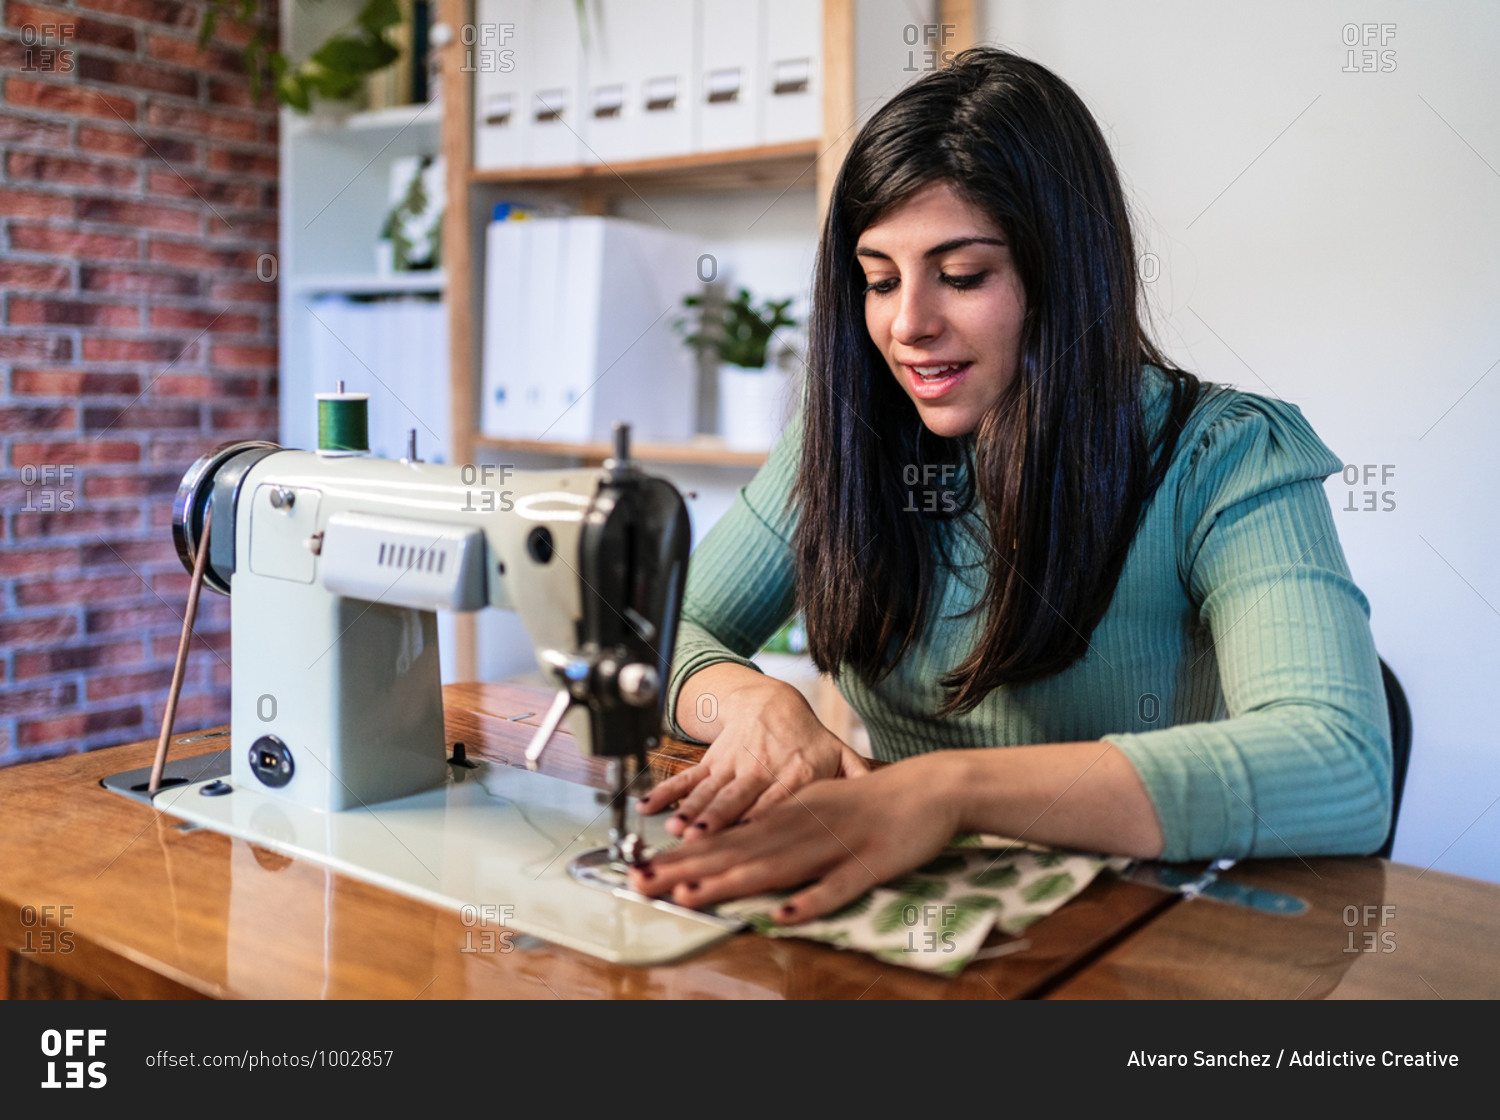 Craftswoman using modern sewing machine while creating soft fabric samples with creative green pattern near lamp in loft style workshop